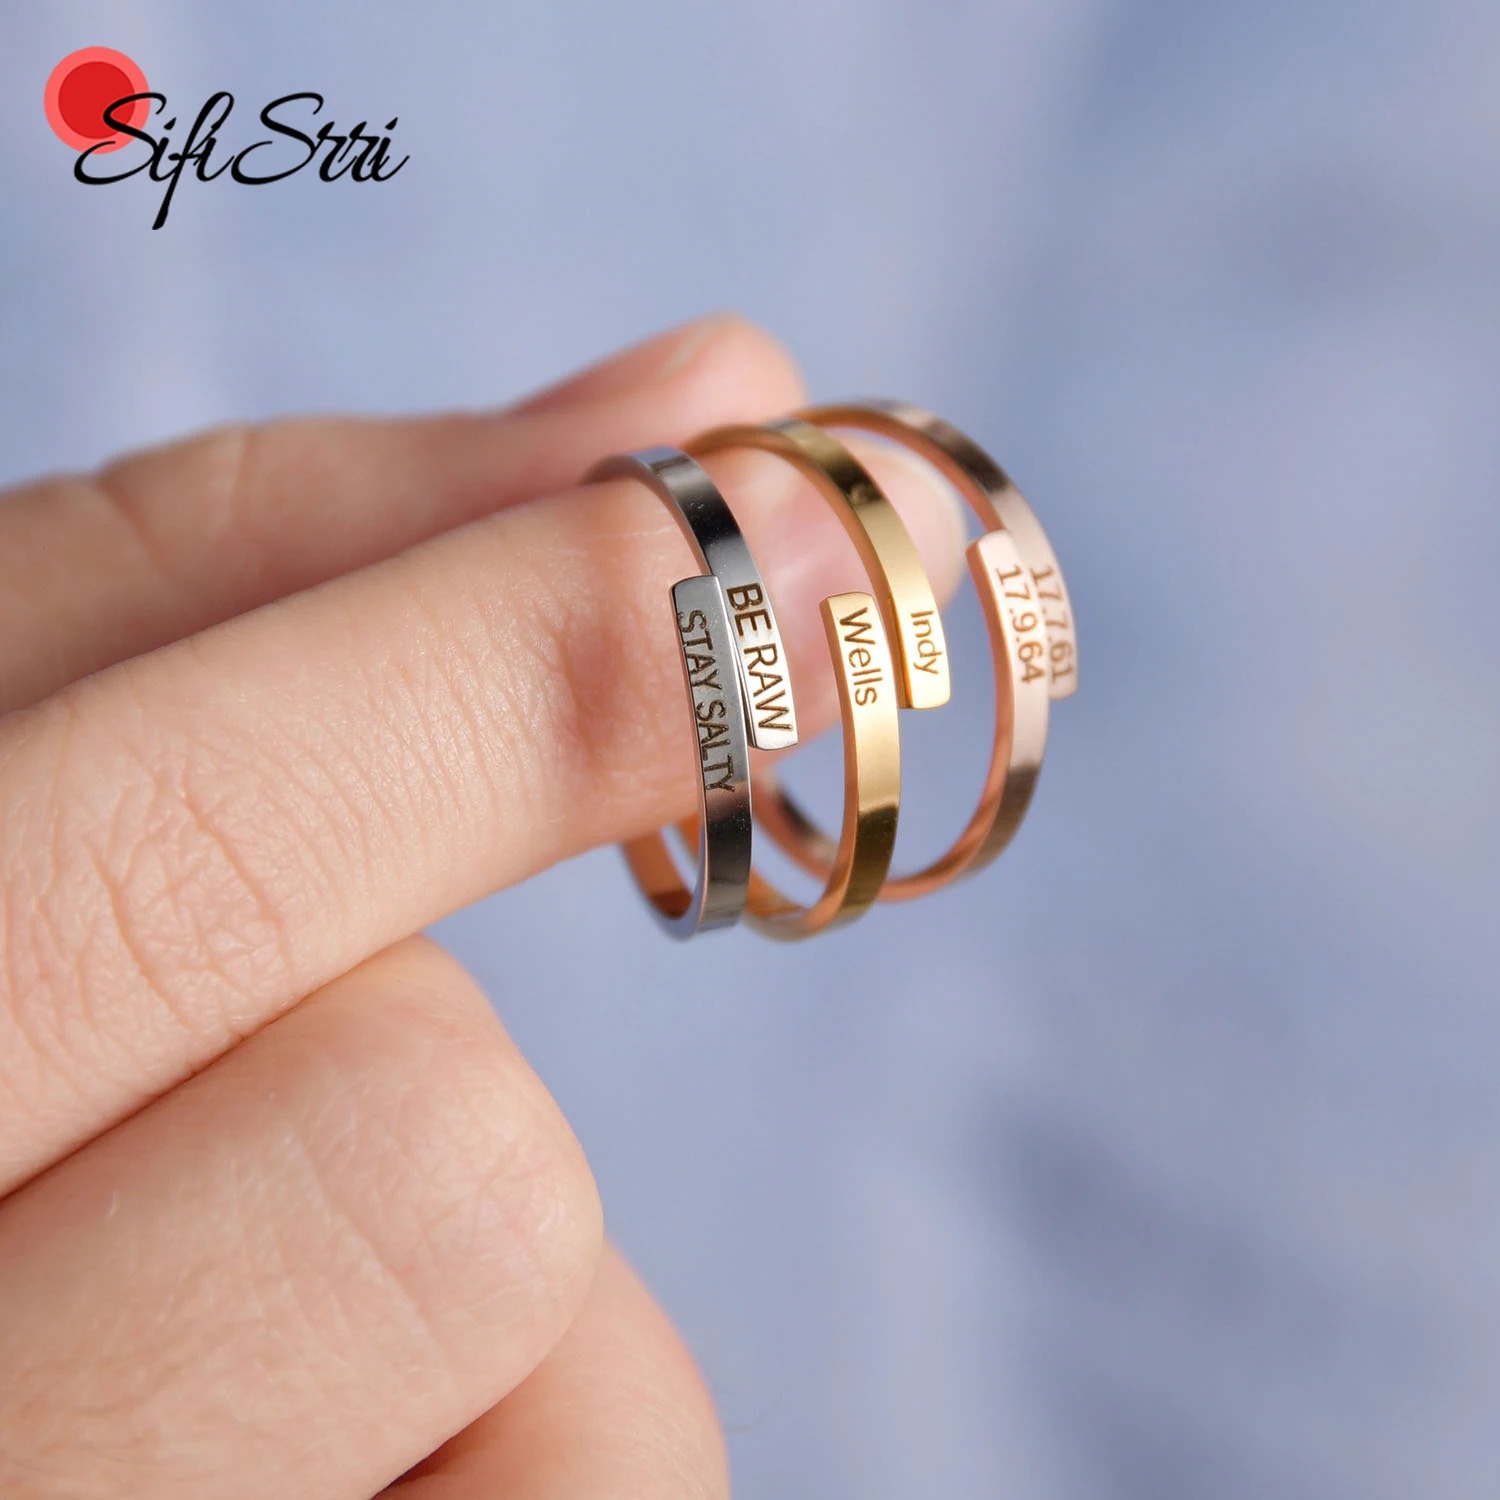 

Sifisrri Engrave Two Names Rings For Women Lover Stainless Steel Adjustable Custom Date Bague Birthday Jewerly Gifts Anillos